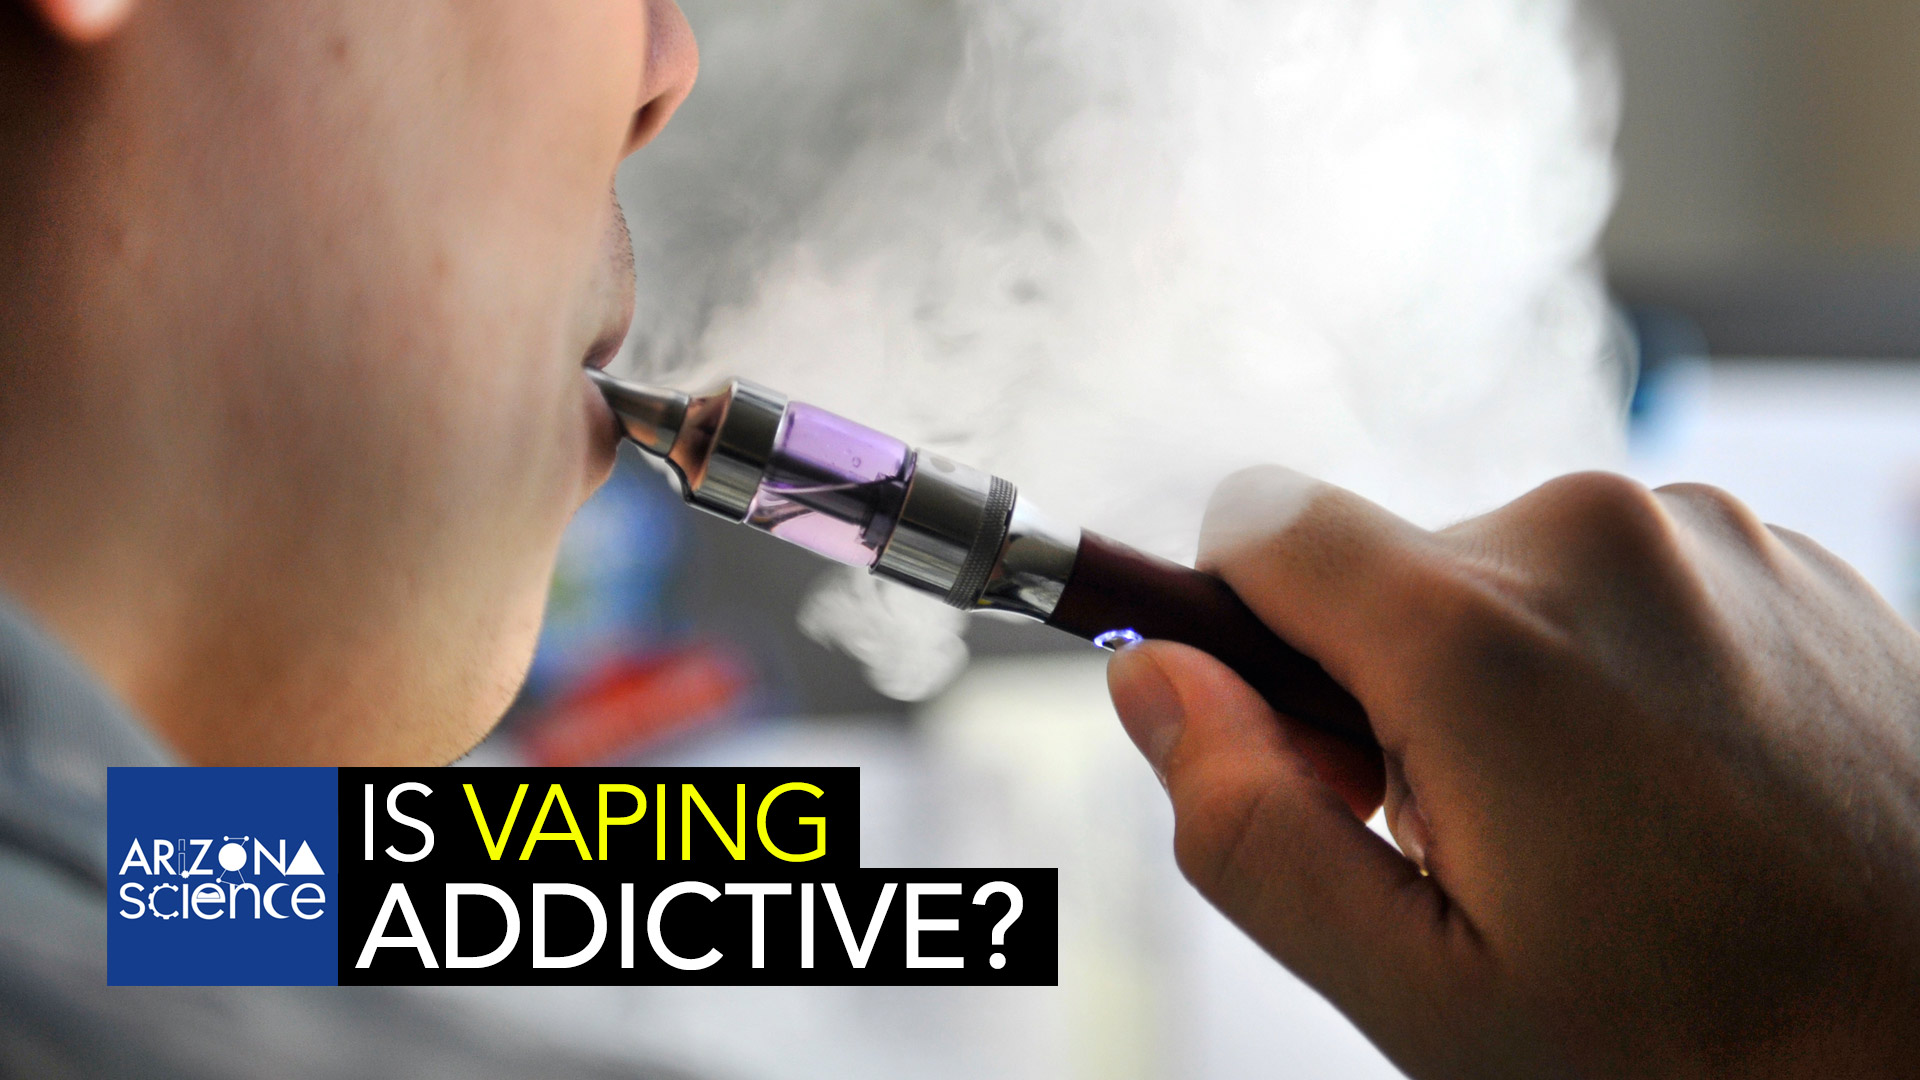 A University of Arizona research team is studying the addictive qualities of e-cigarettes.